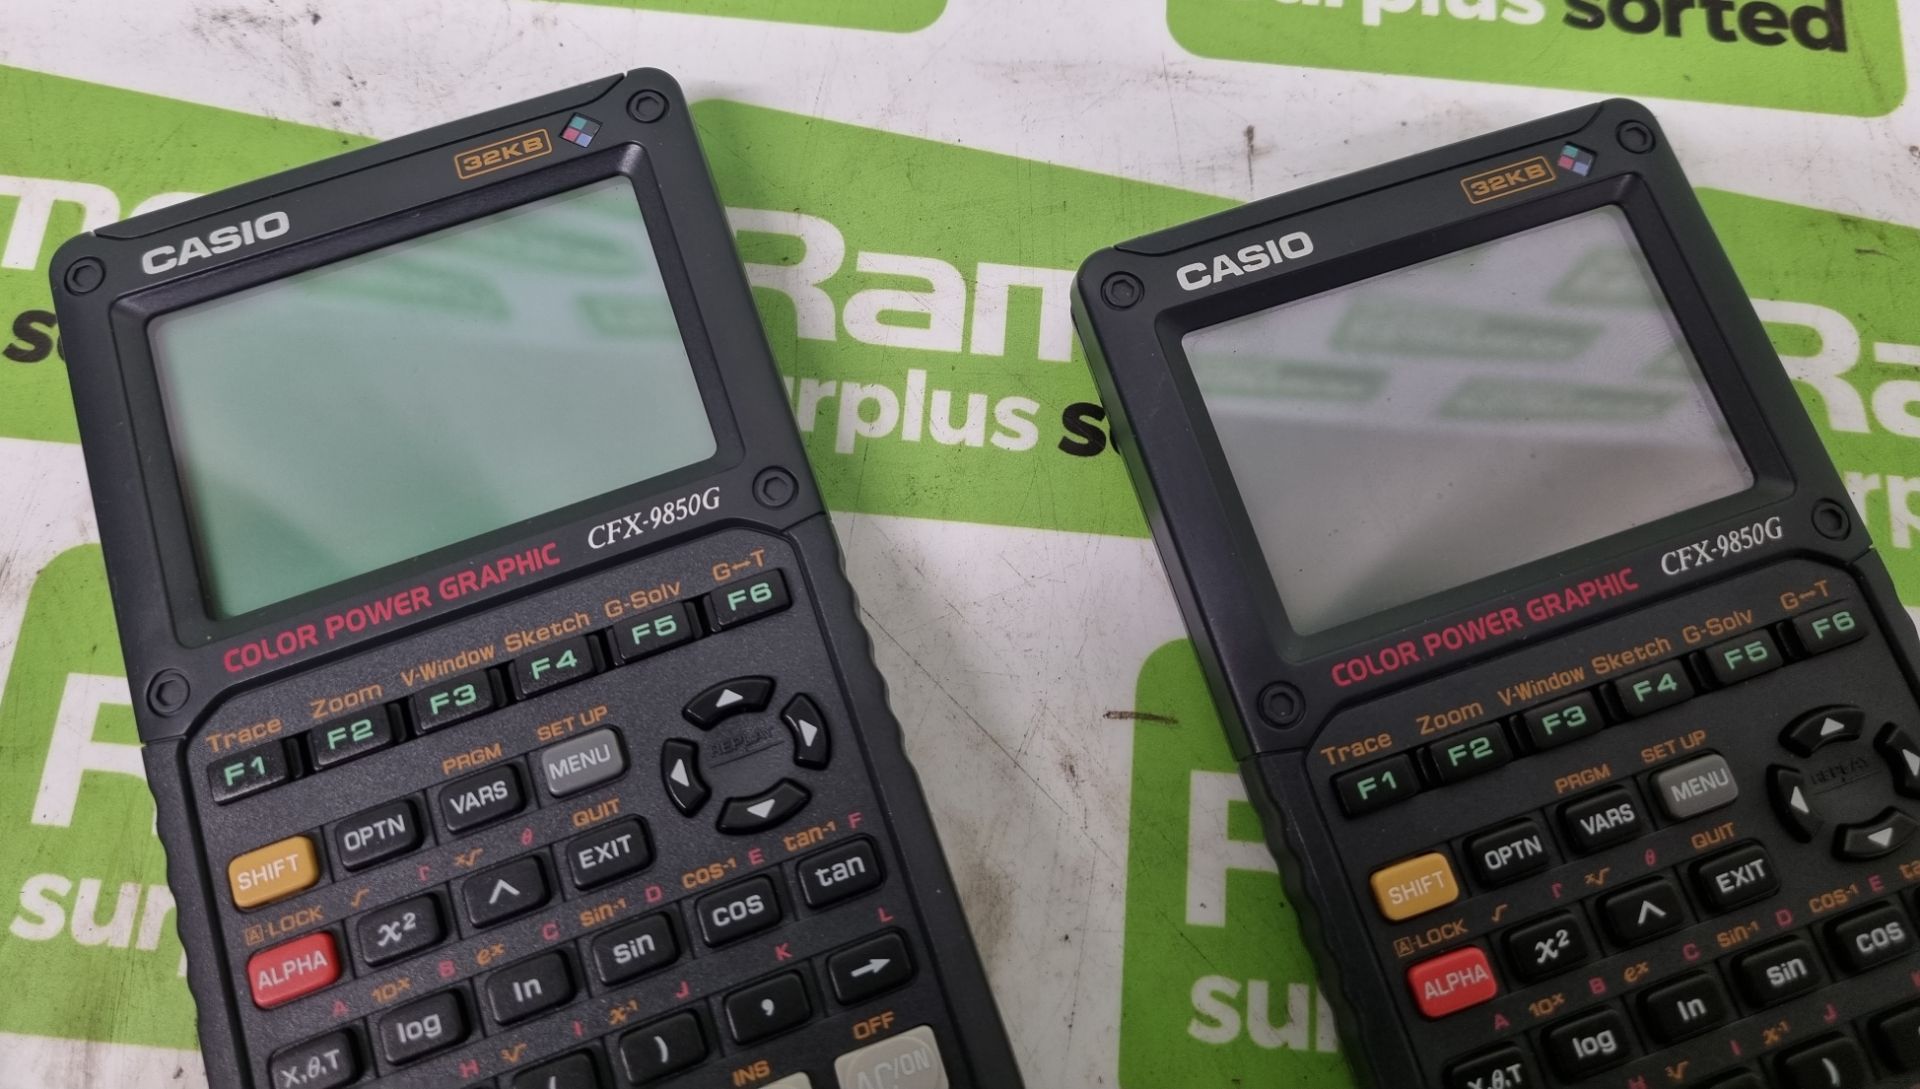 2x Casio CFX-9850G colour power graphic electronic PPI calculators - Image 2 of 3